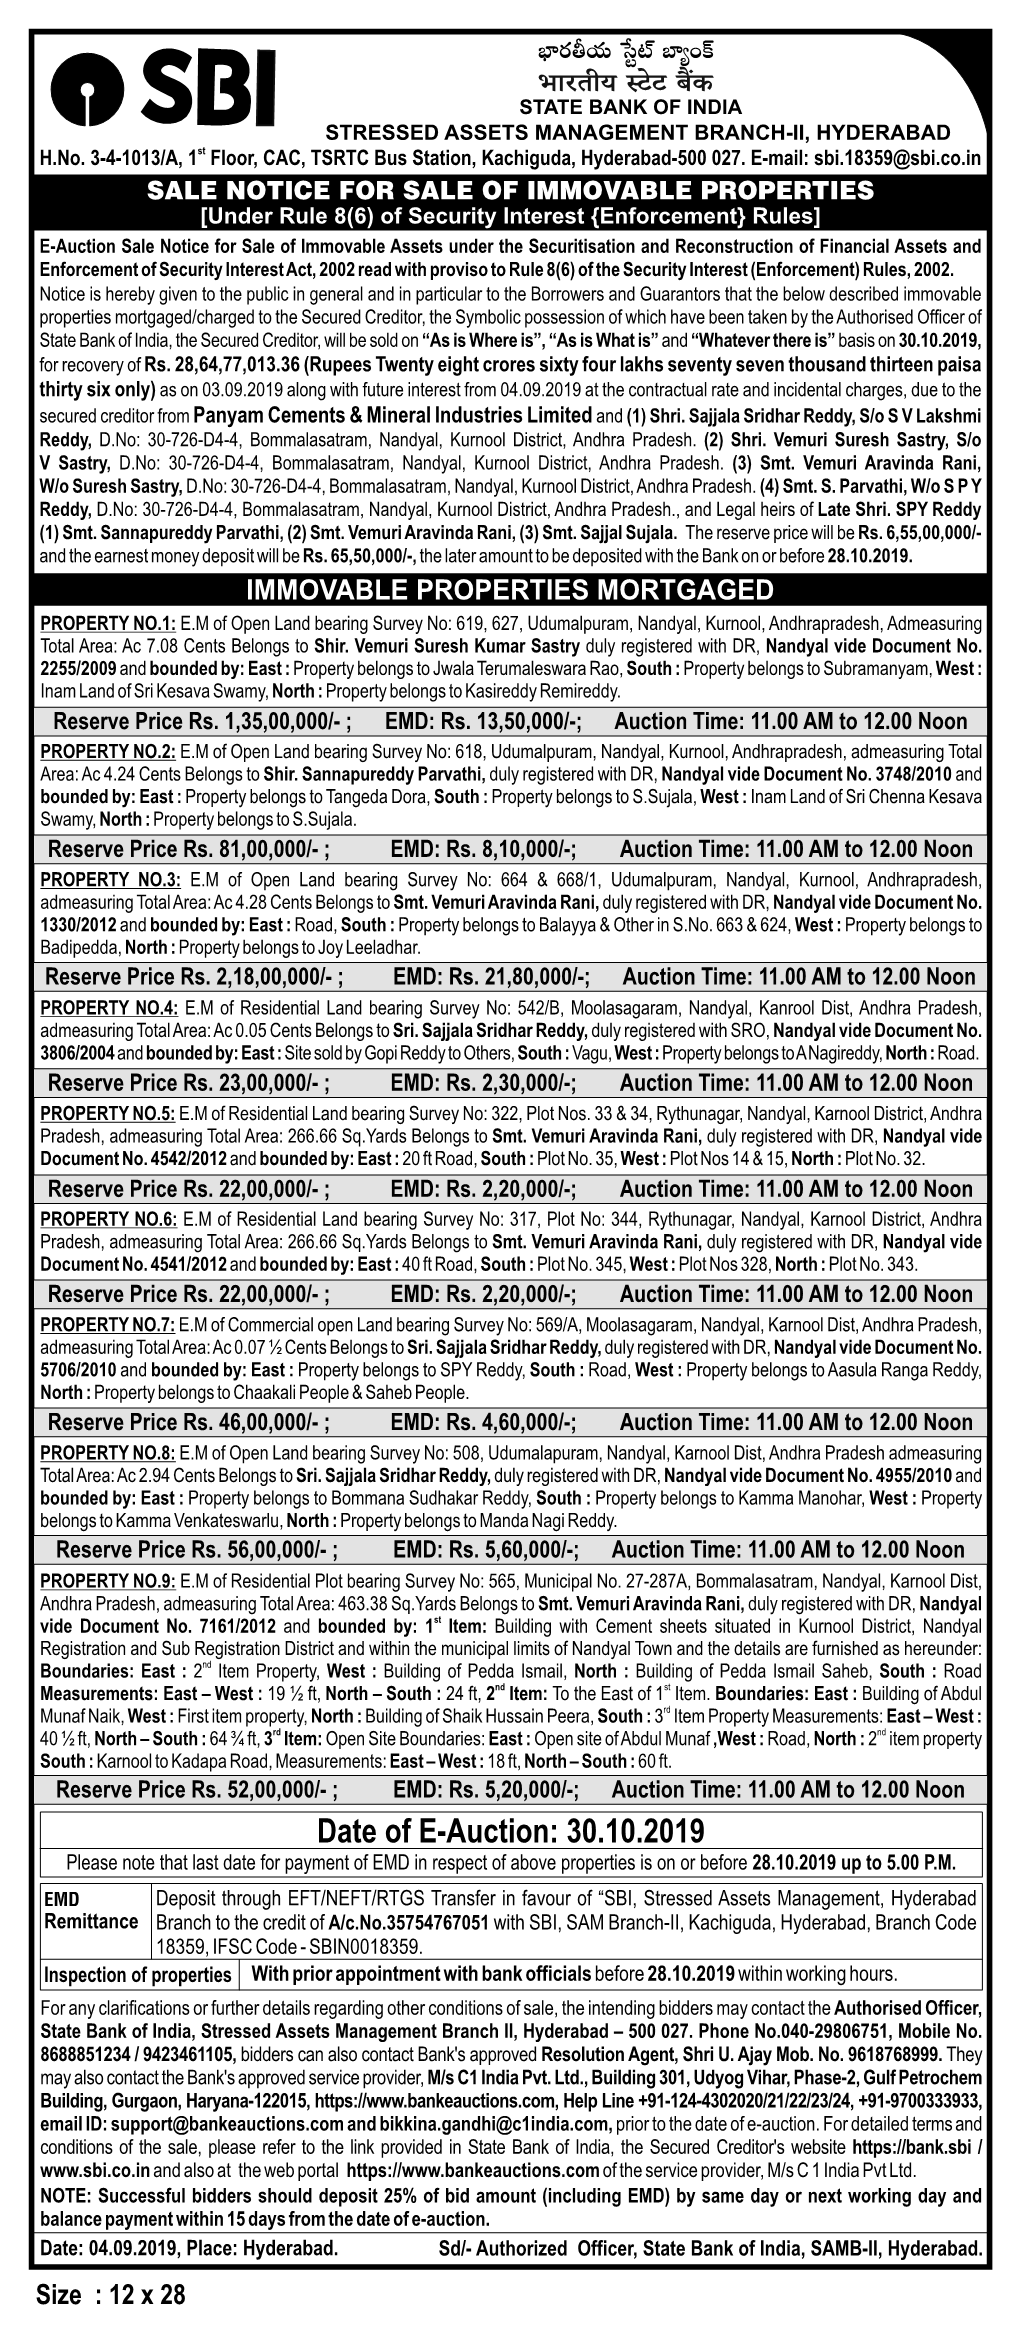 Date of E-Auction: 30.10.2019 Please Note That Last Date for Payment of EMD in Respect of Above Properties Is on Or Before 28.10.2019 up to 5.00 P.M